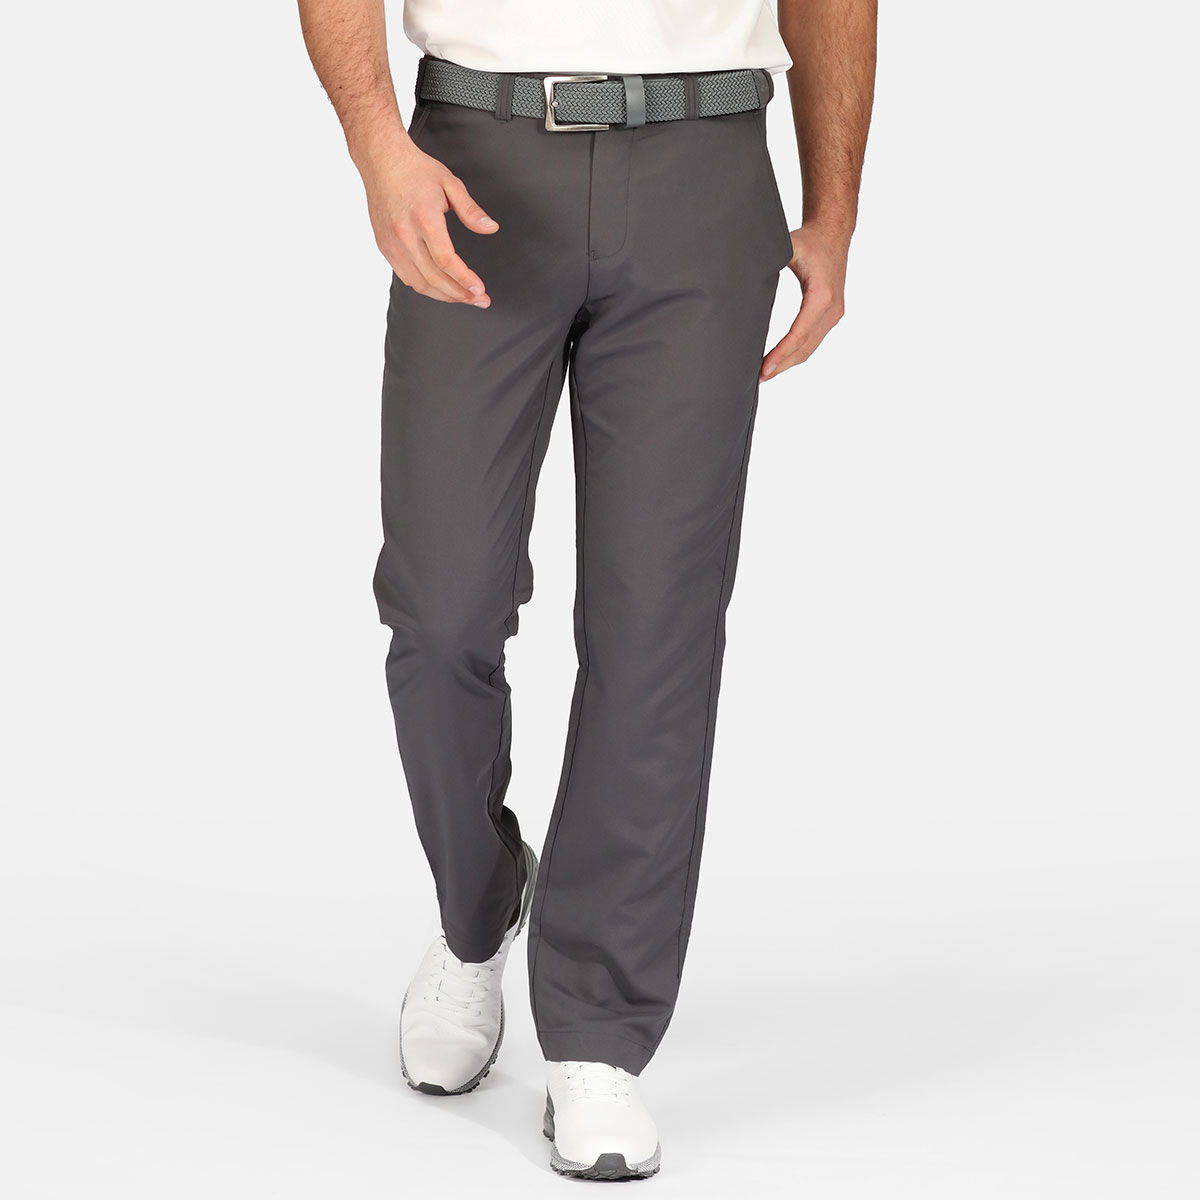 Stromberg Men's Weather Tech Stretch Golf Trousers, Mens, Grey, 44, Short | American Golf - Father's Day Gift von Stromberg